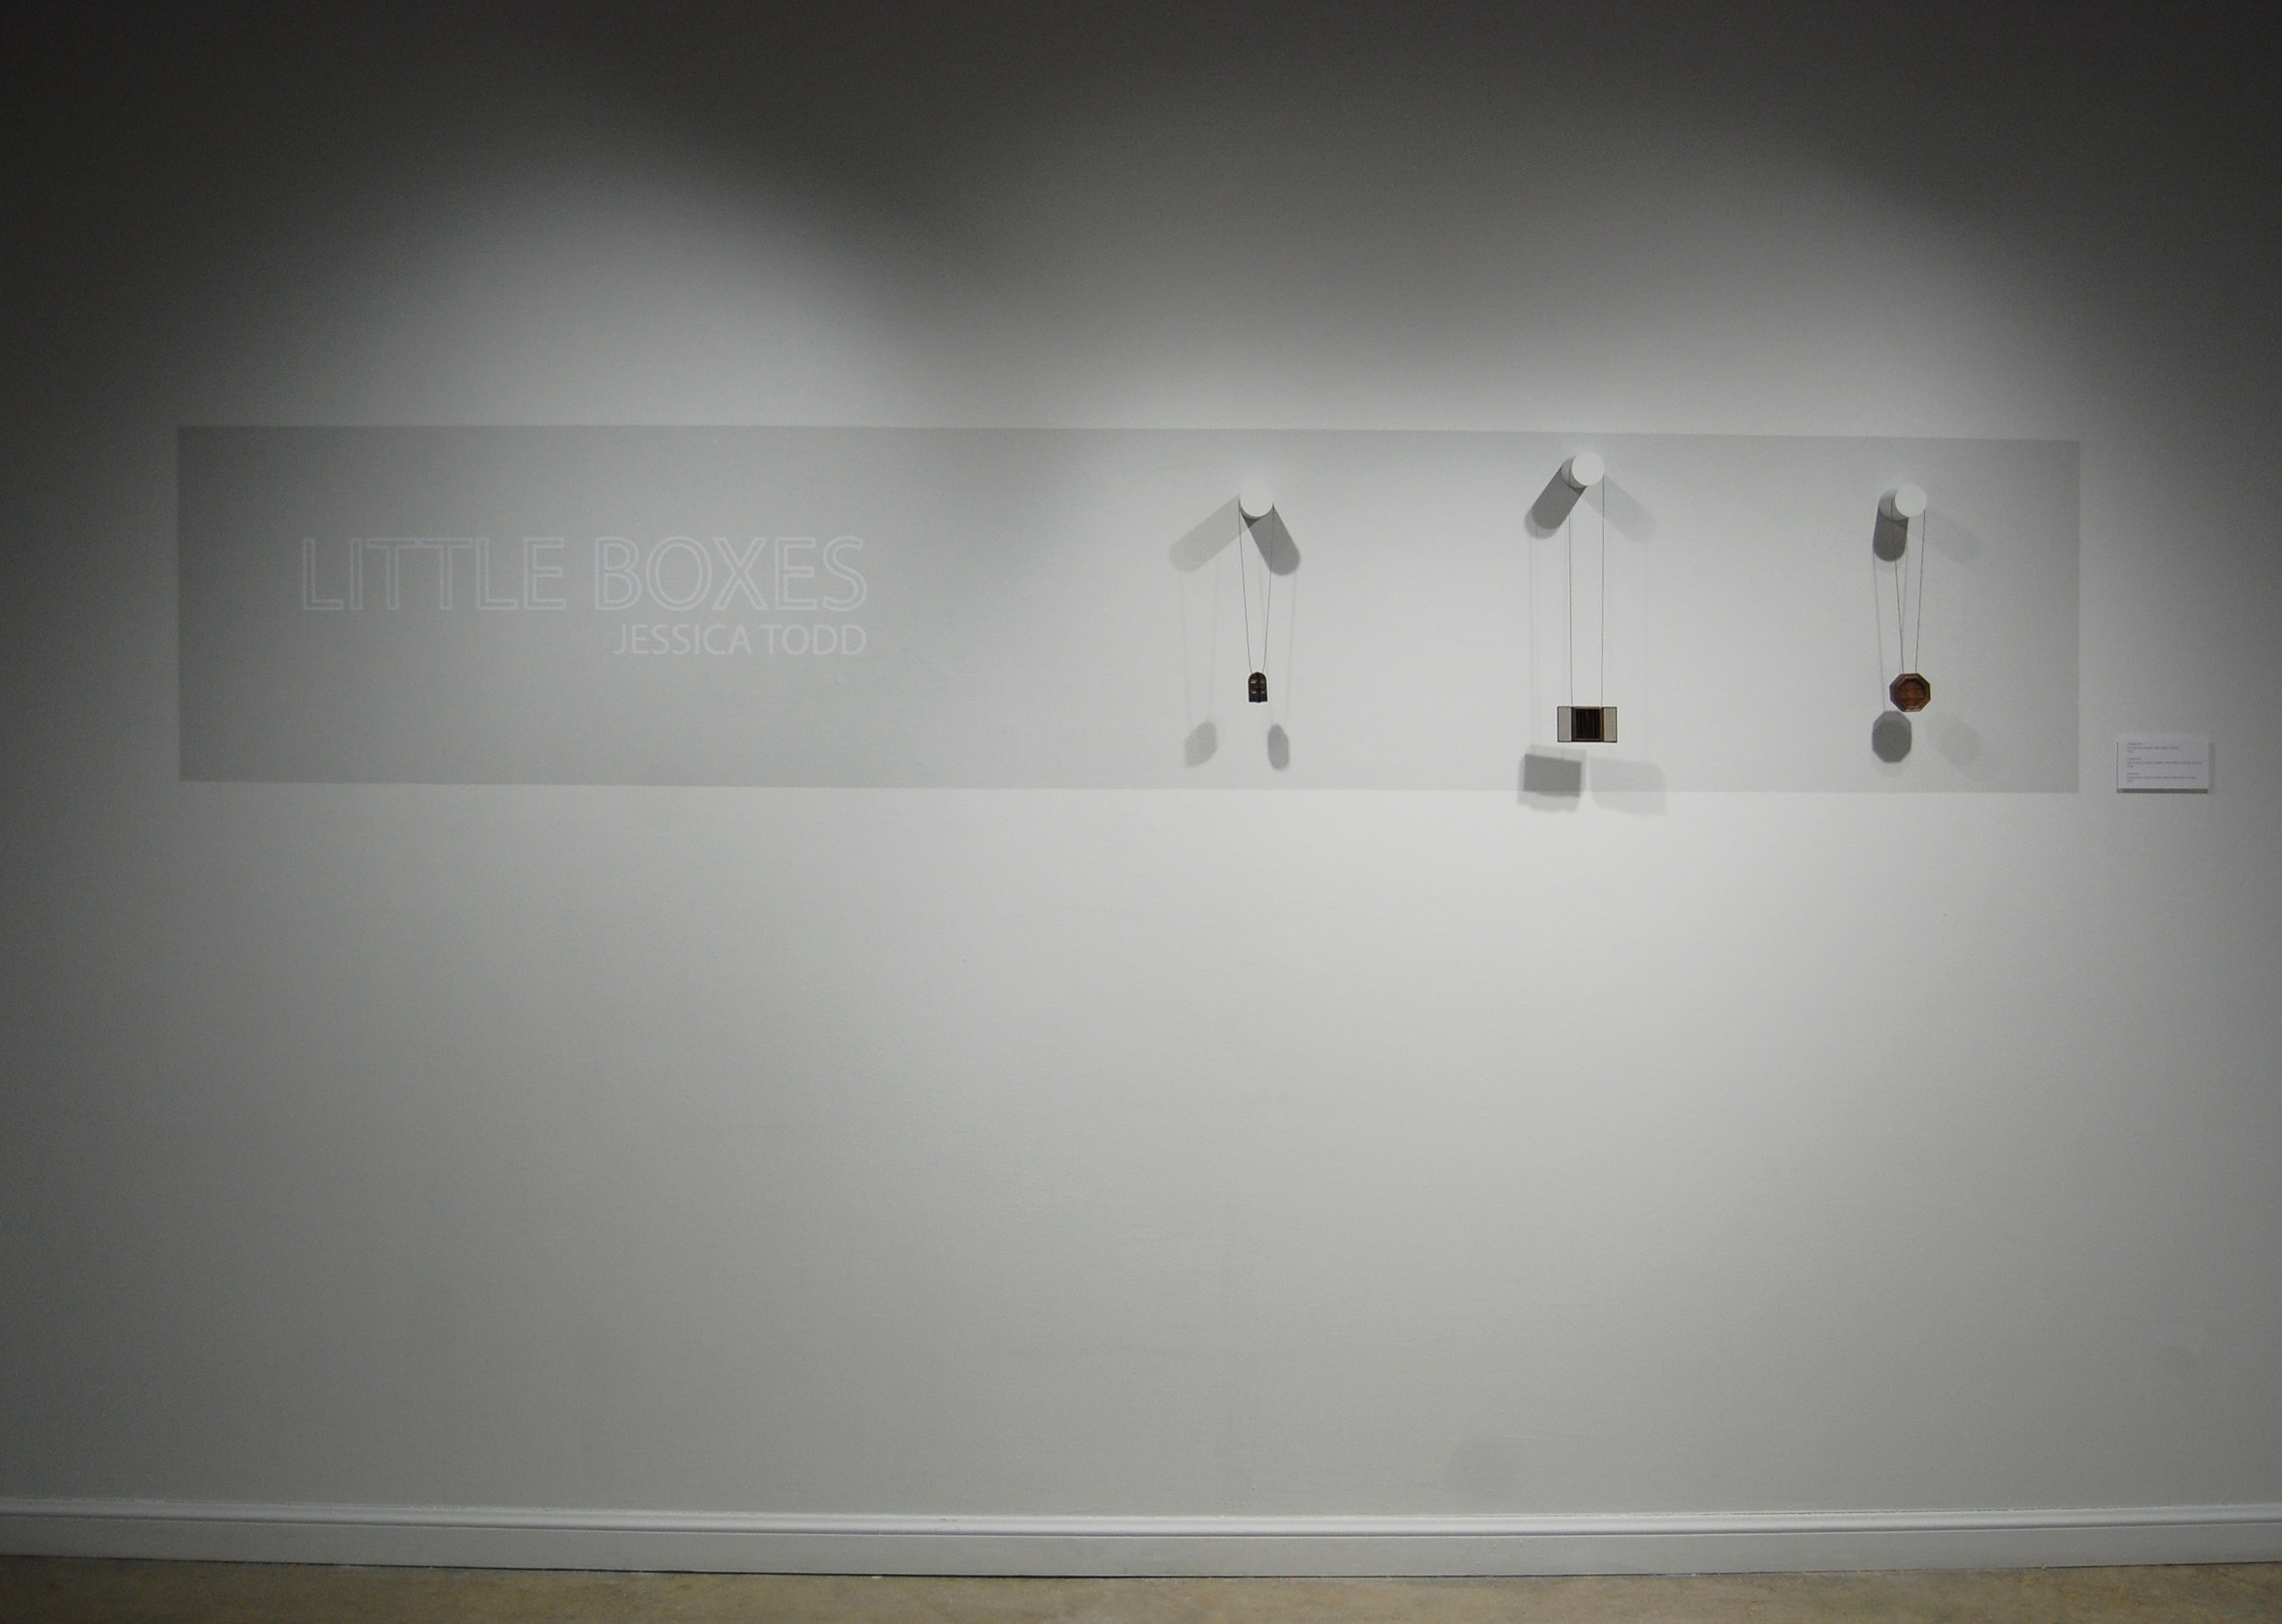  Figure 19:  Little Boxes  Installation View 4 